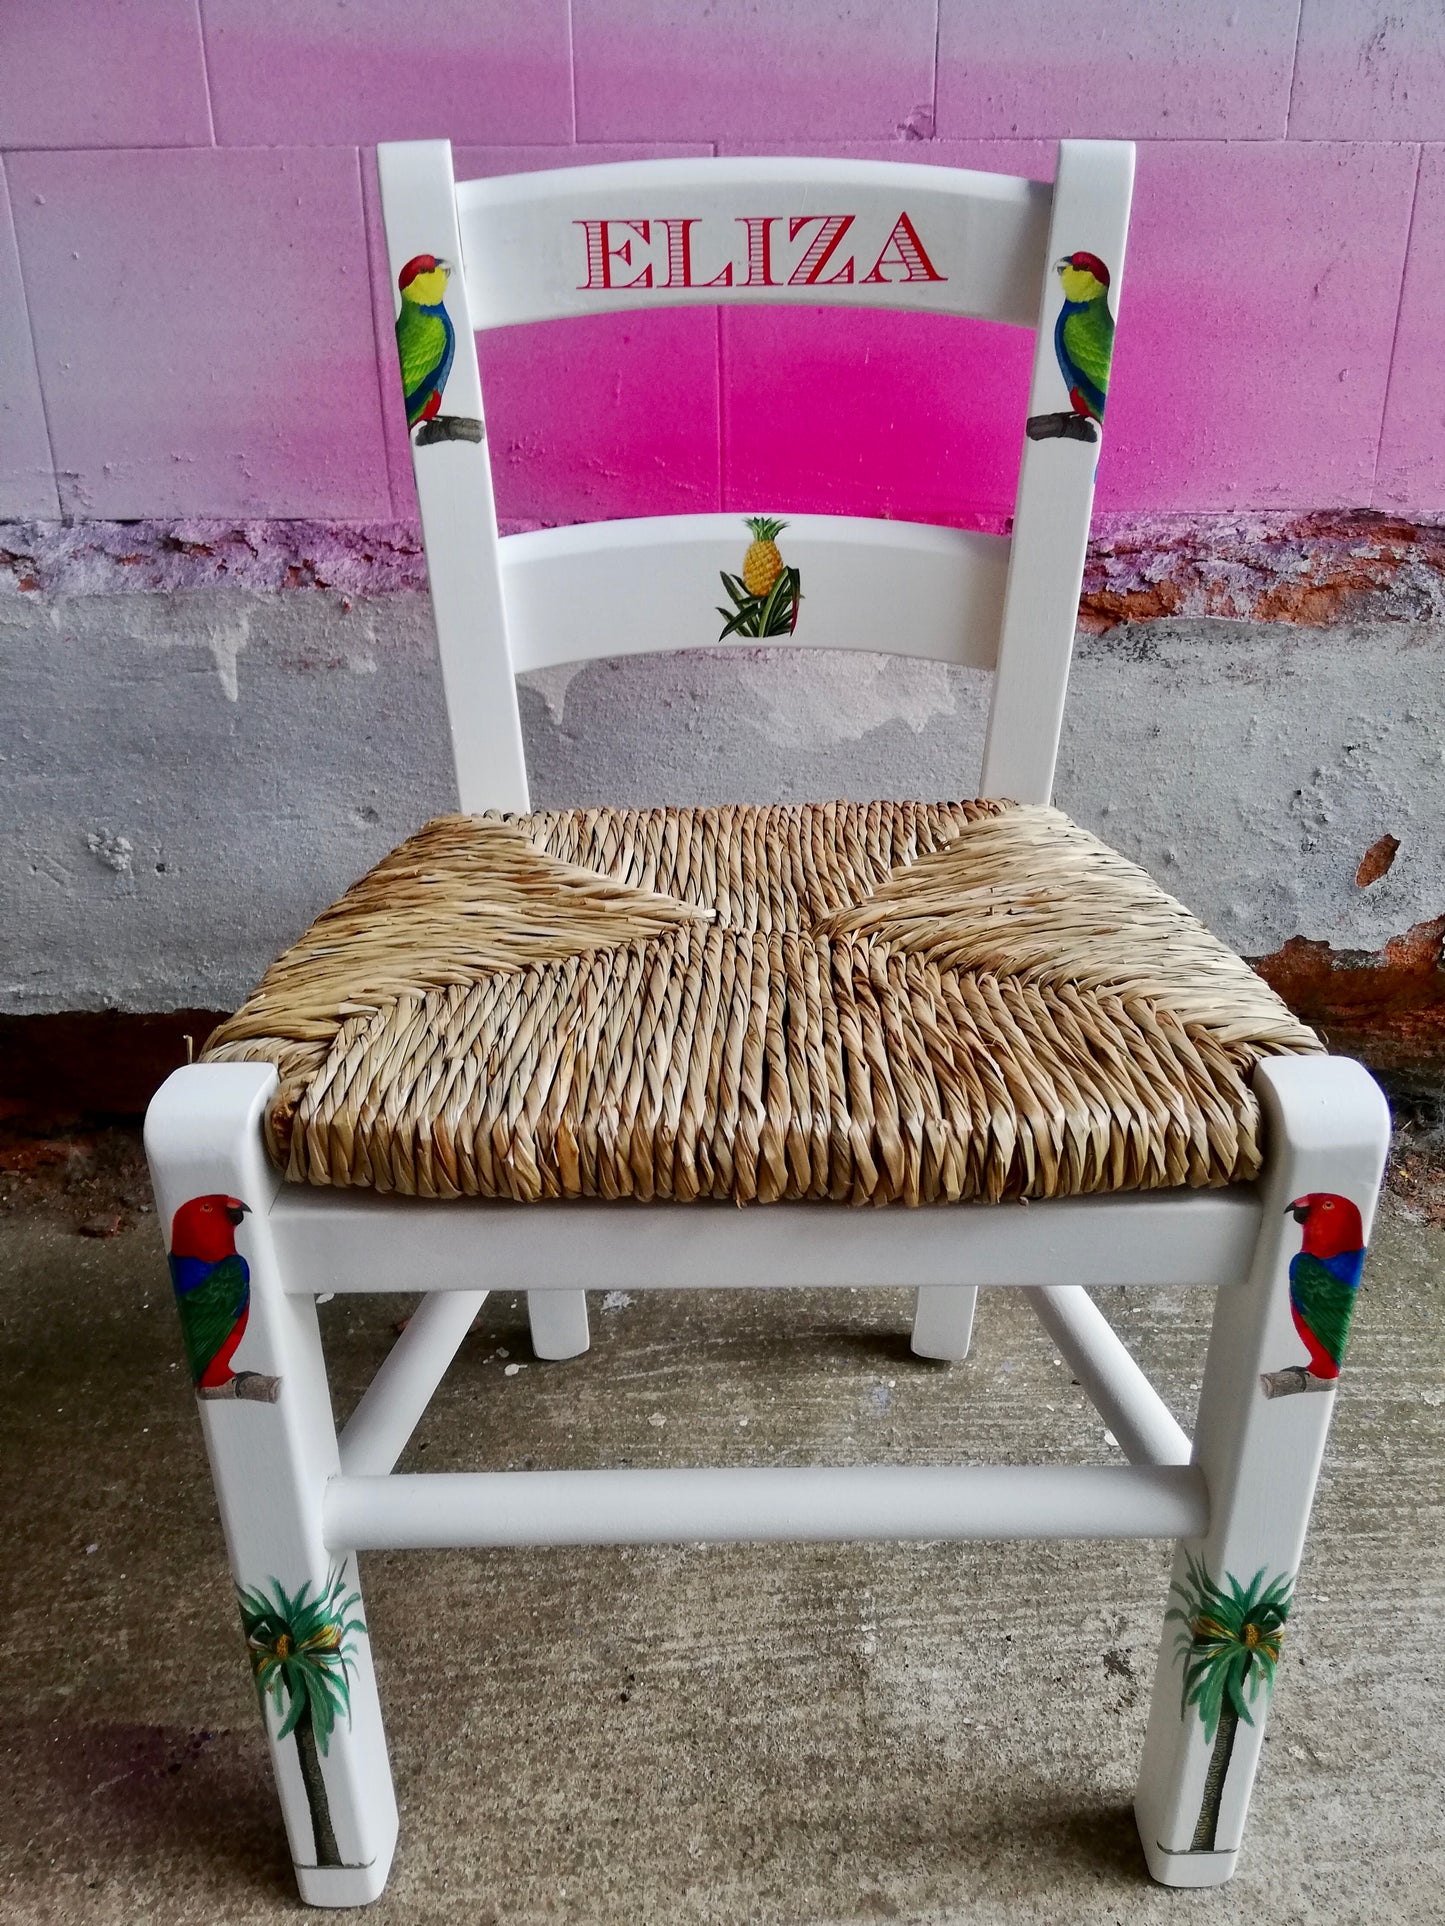 Rush seat personalised children's chair - Tropical theme - made to order